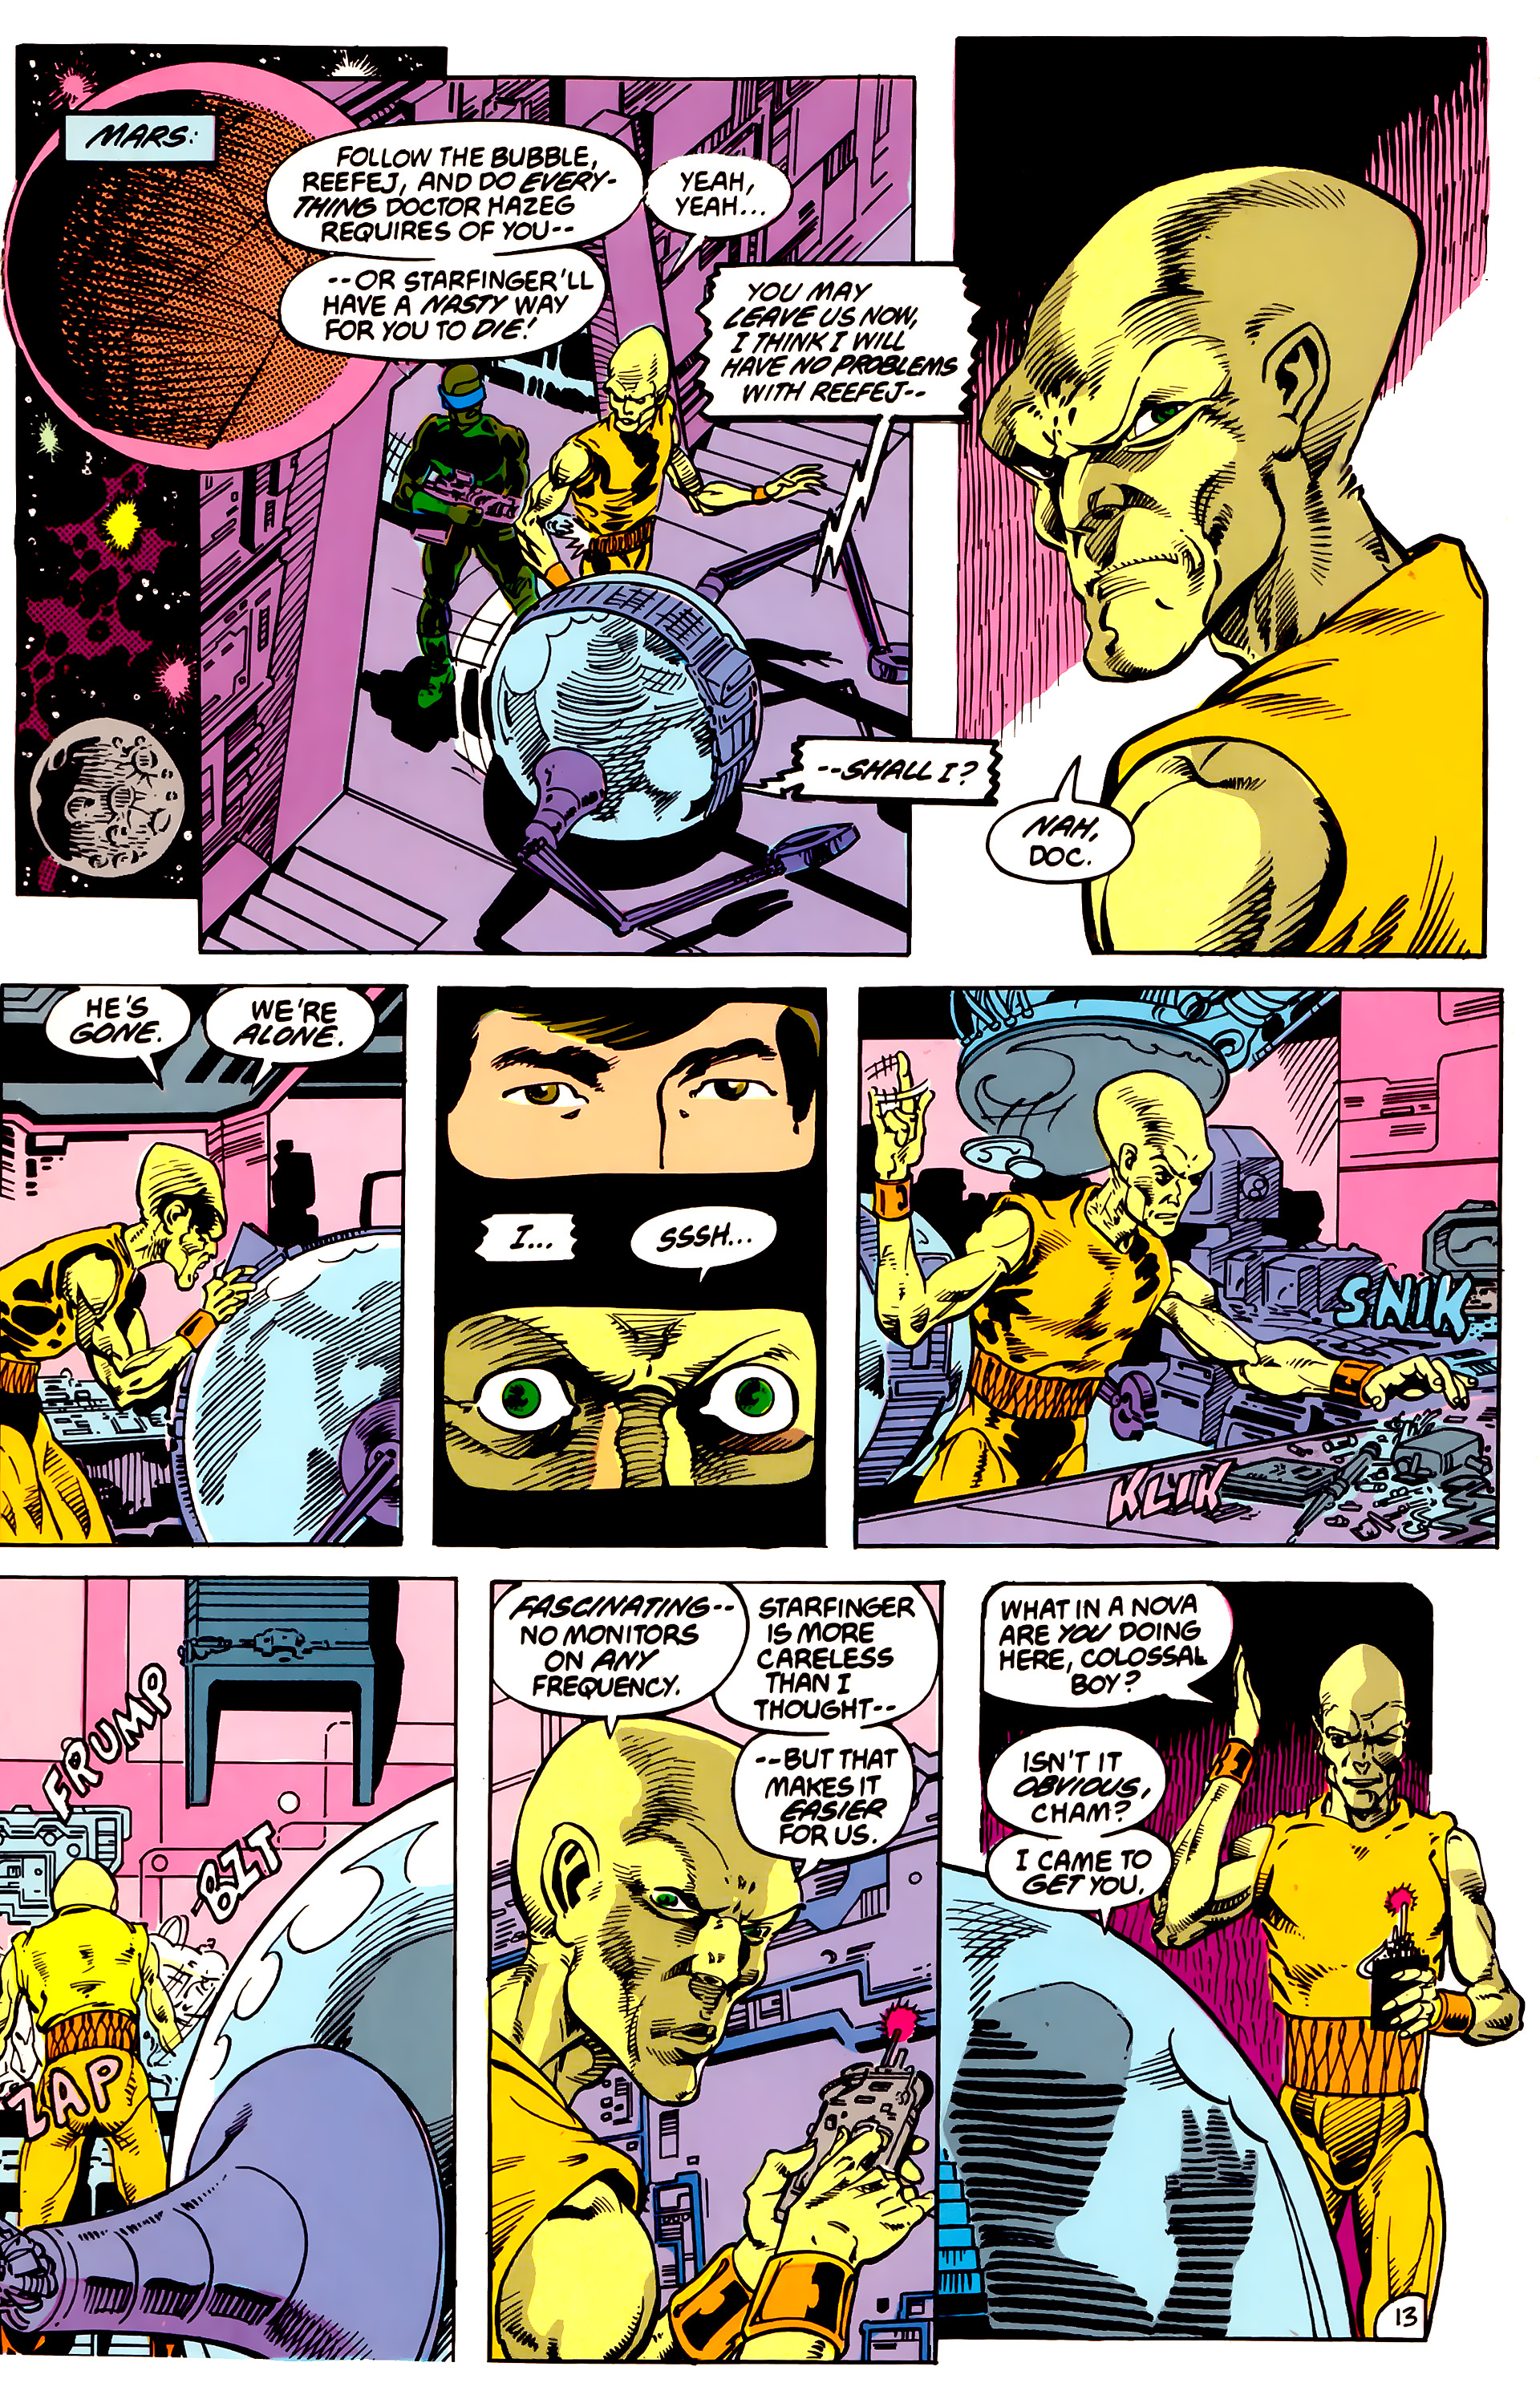 Legion of Super-Heroes (1984) 49 Page 13